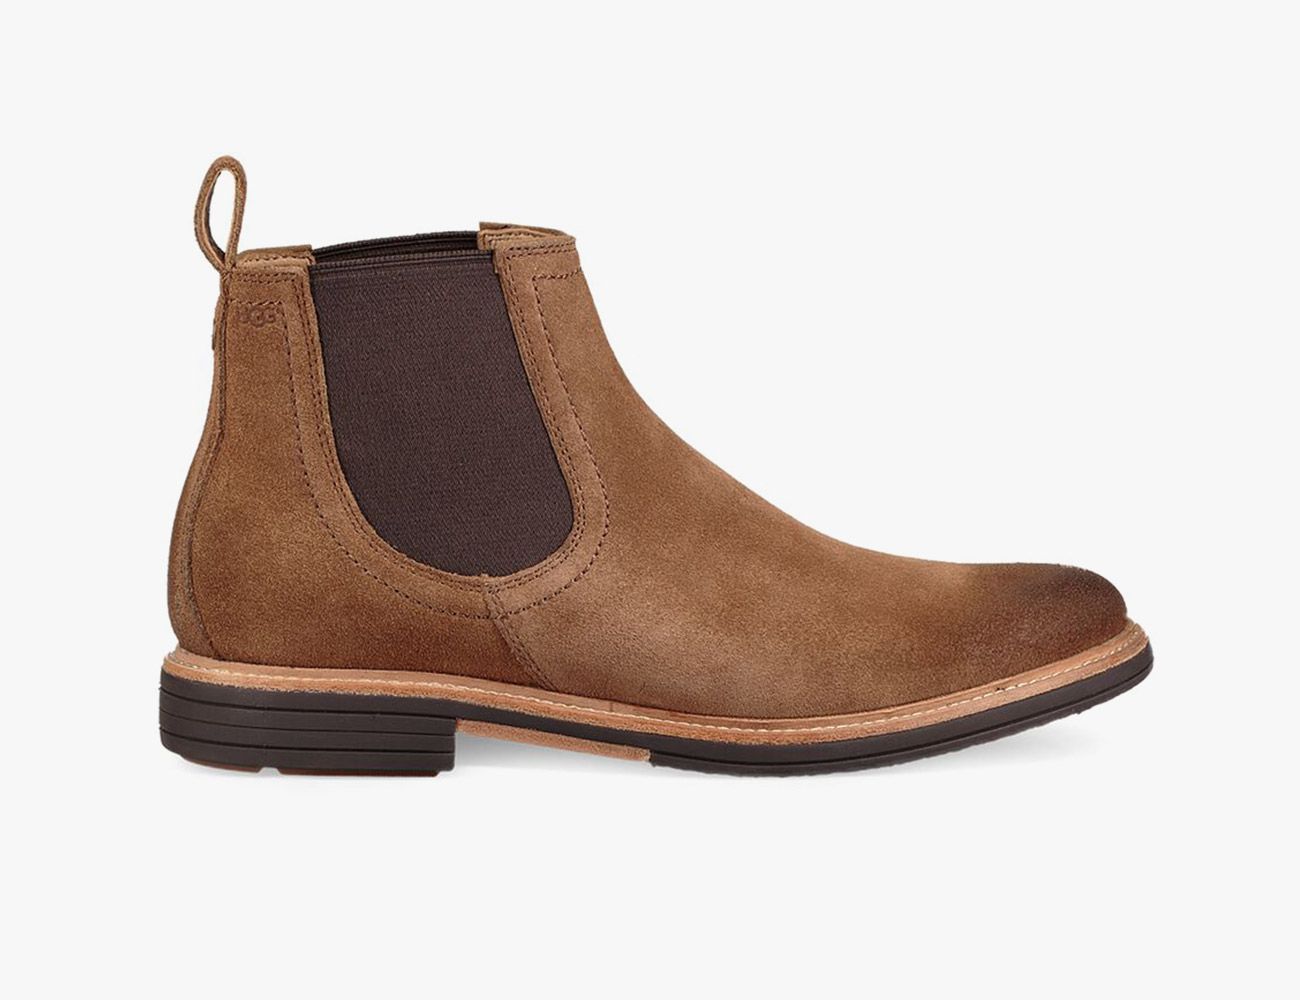 Our Guide to Every Boot UGG Makes for Men